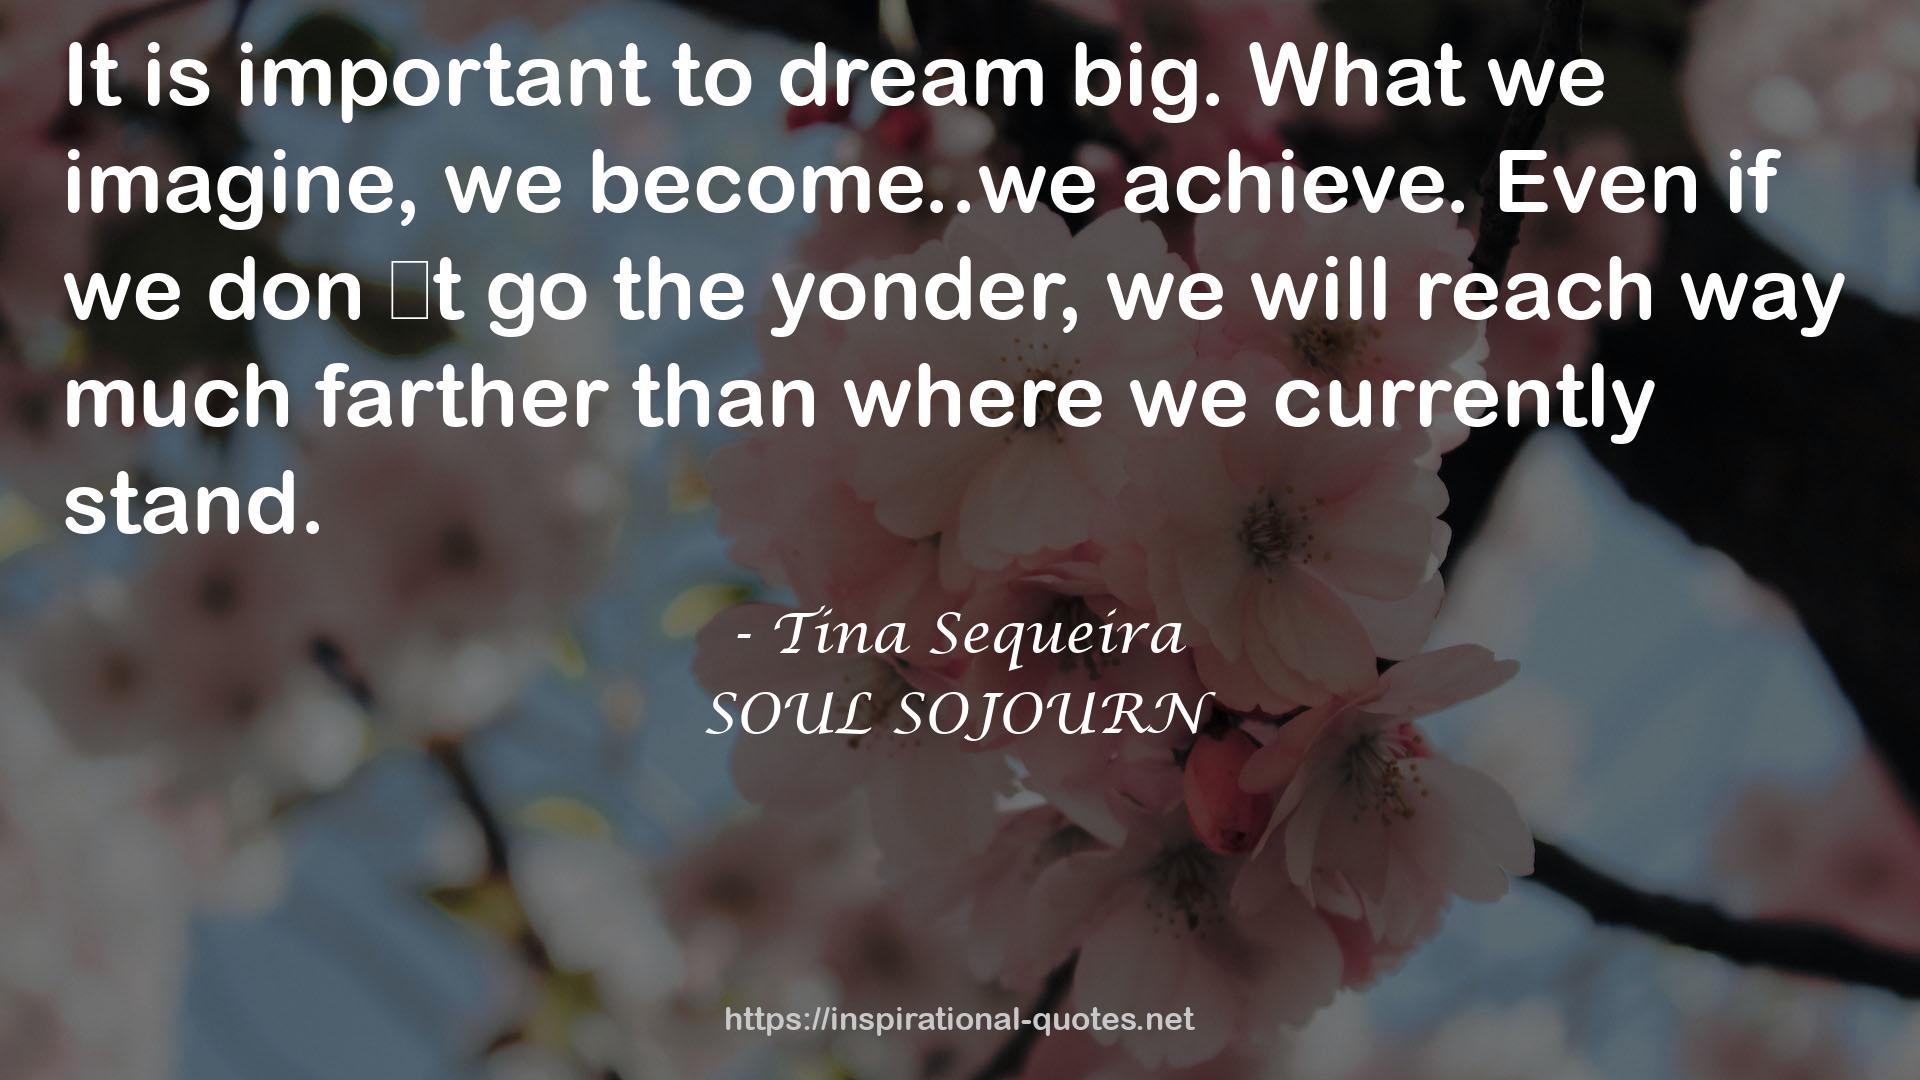 SOUL SOJOURN QUOTES